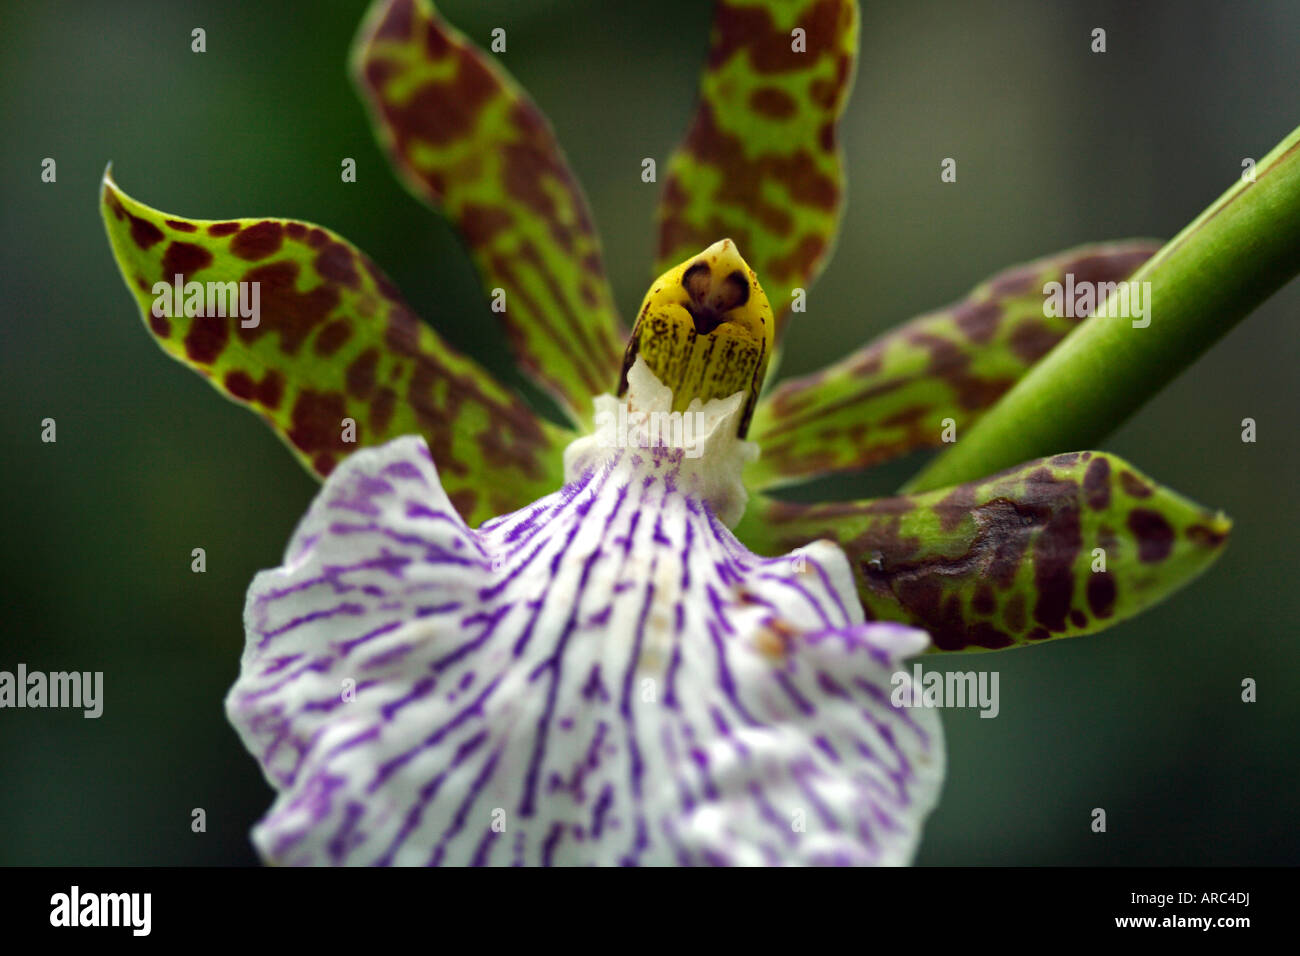 Close-up of a Zygopetalum orchid flower Stock Photo